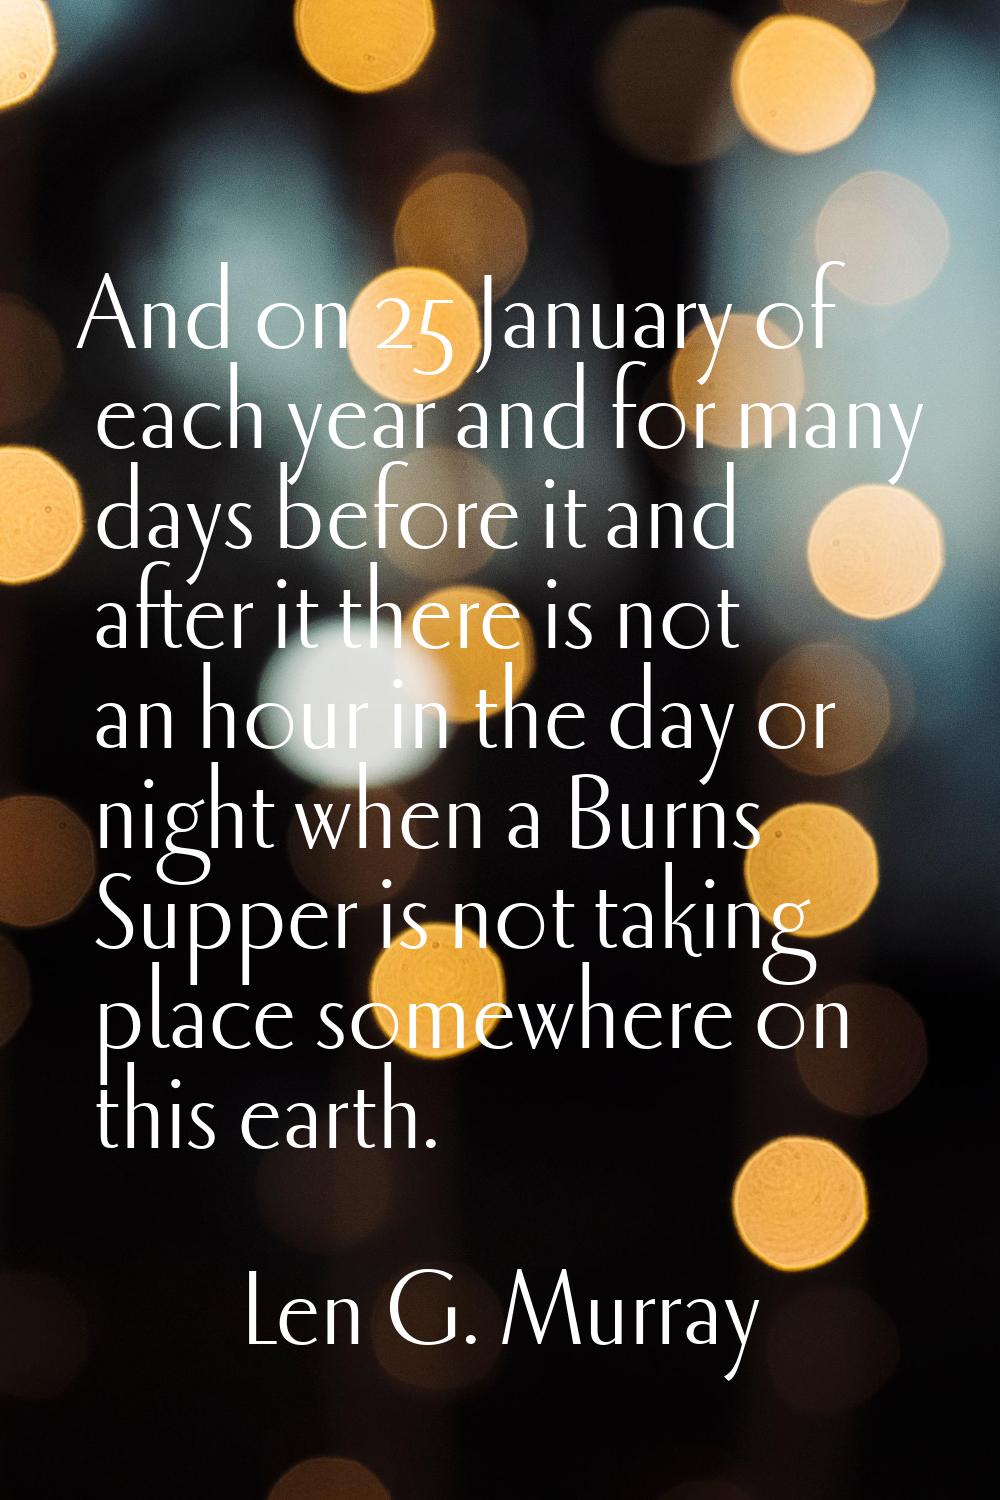 And on 25 January of each year and for many days before it and after it there is not an hour in the